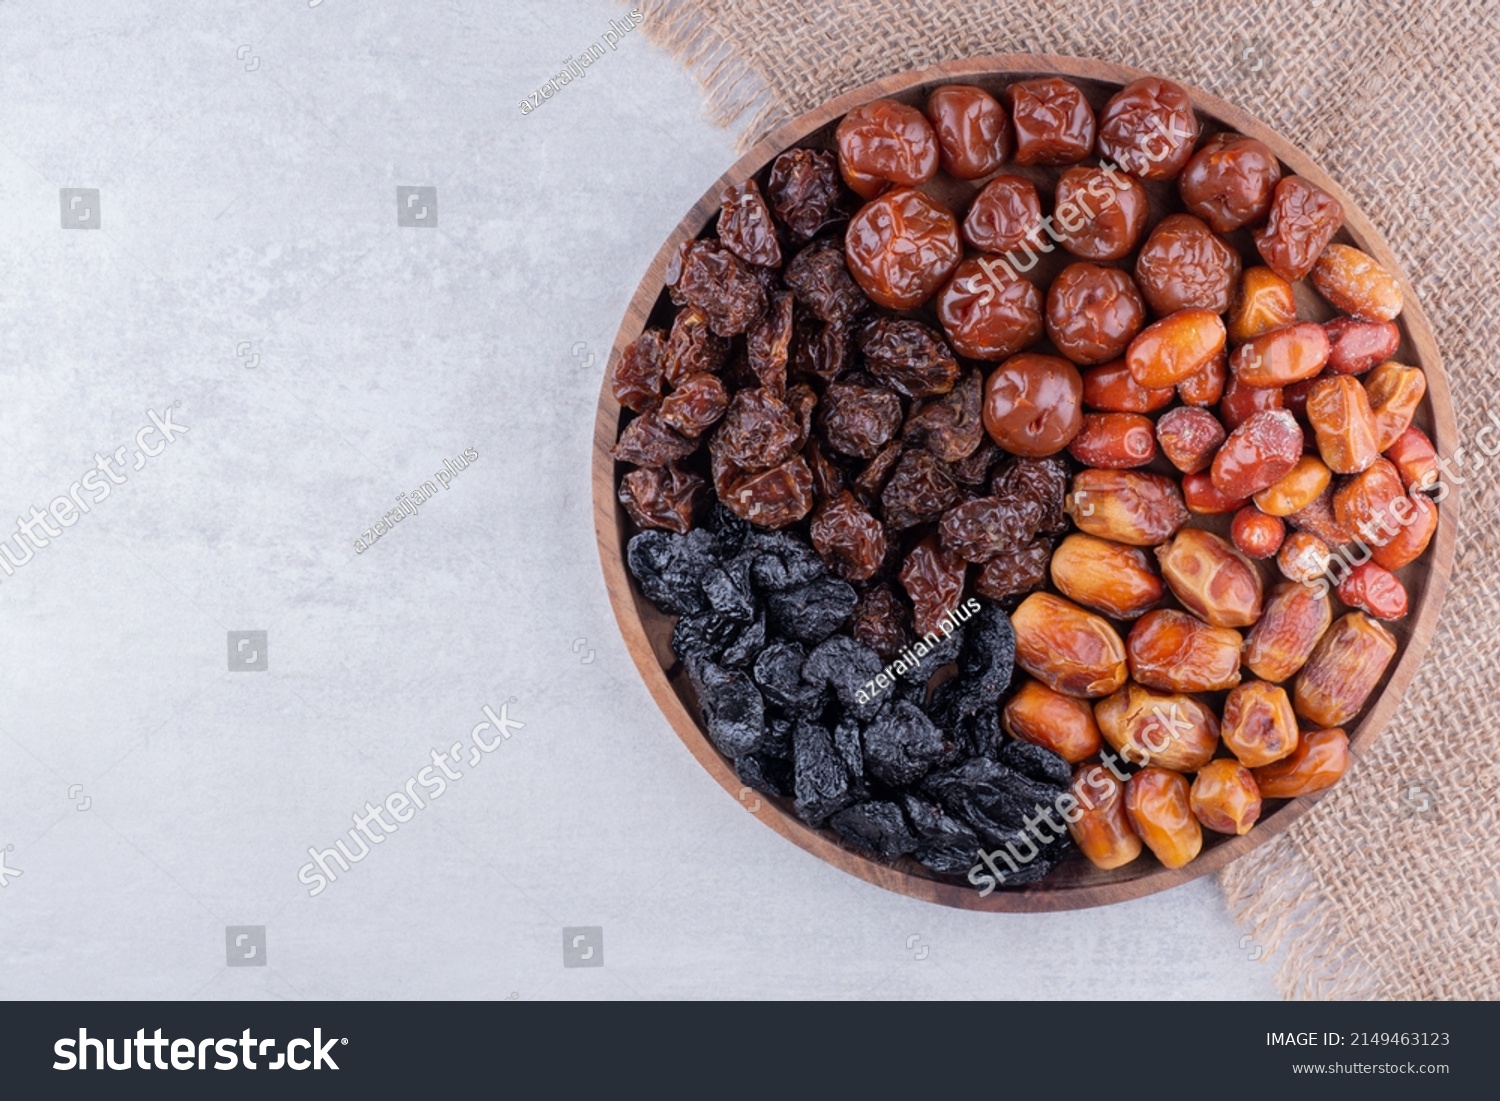 Dates or dattes palm fruit in wooden bowl is snack healthy, Set of various dates in bowl, Different kind of raw date fruit ready to eat, concrete background, Traditional, delicious and healthy ramadan #2149463123